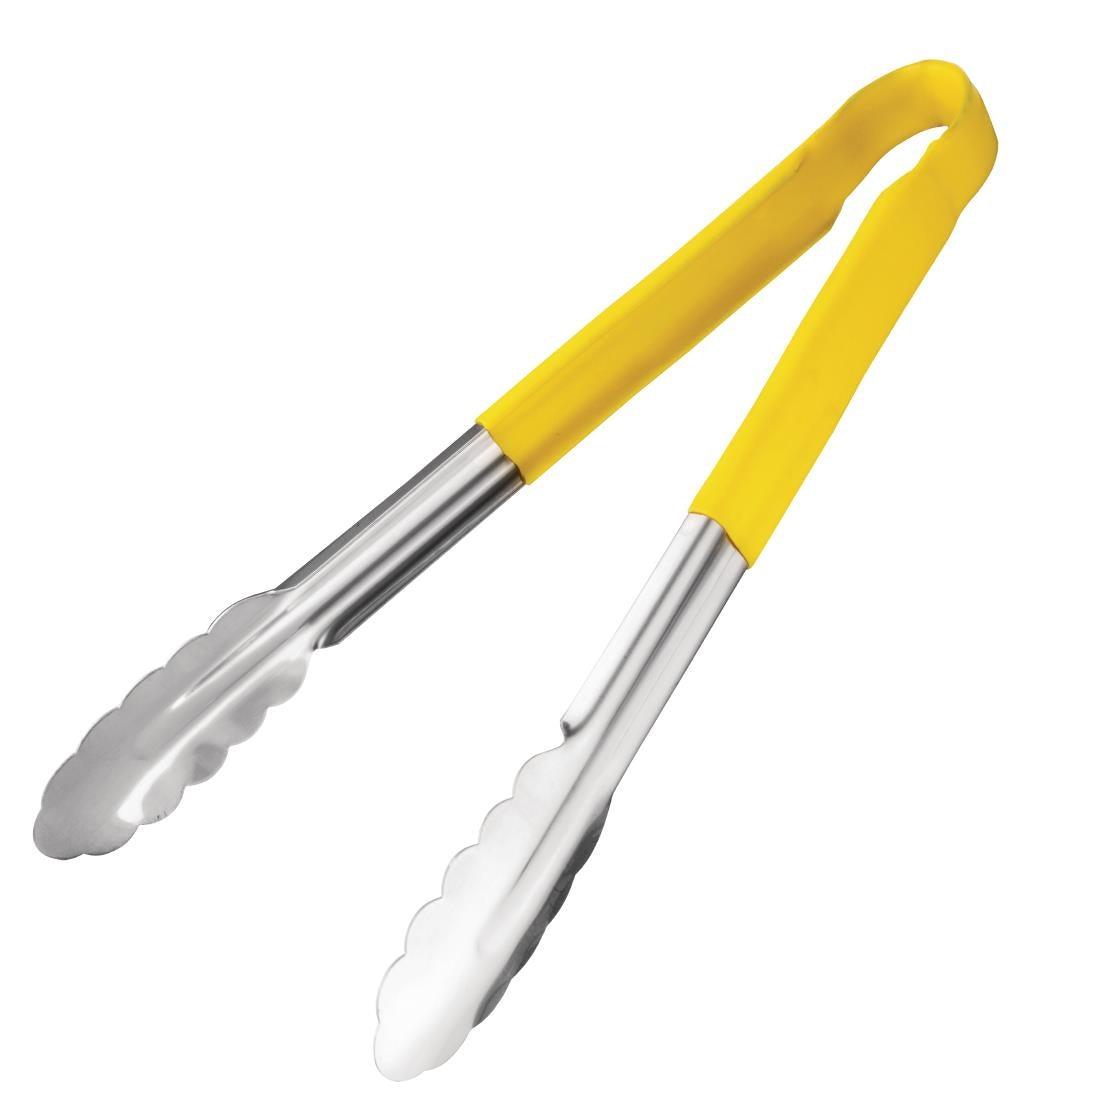 Vogue Colour Coded Yellow Serving Tongs 300mm - HospoStore